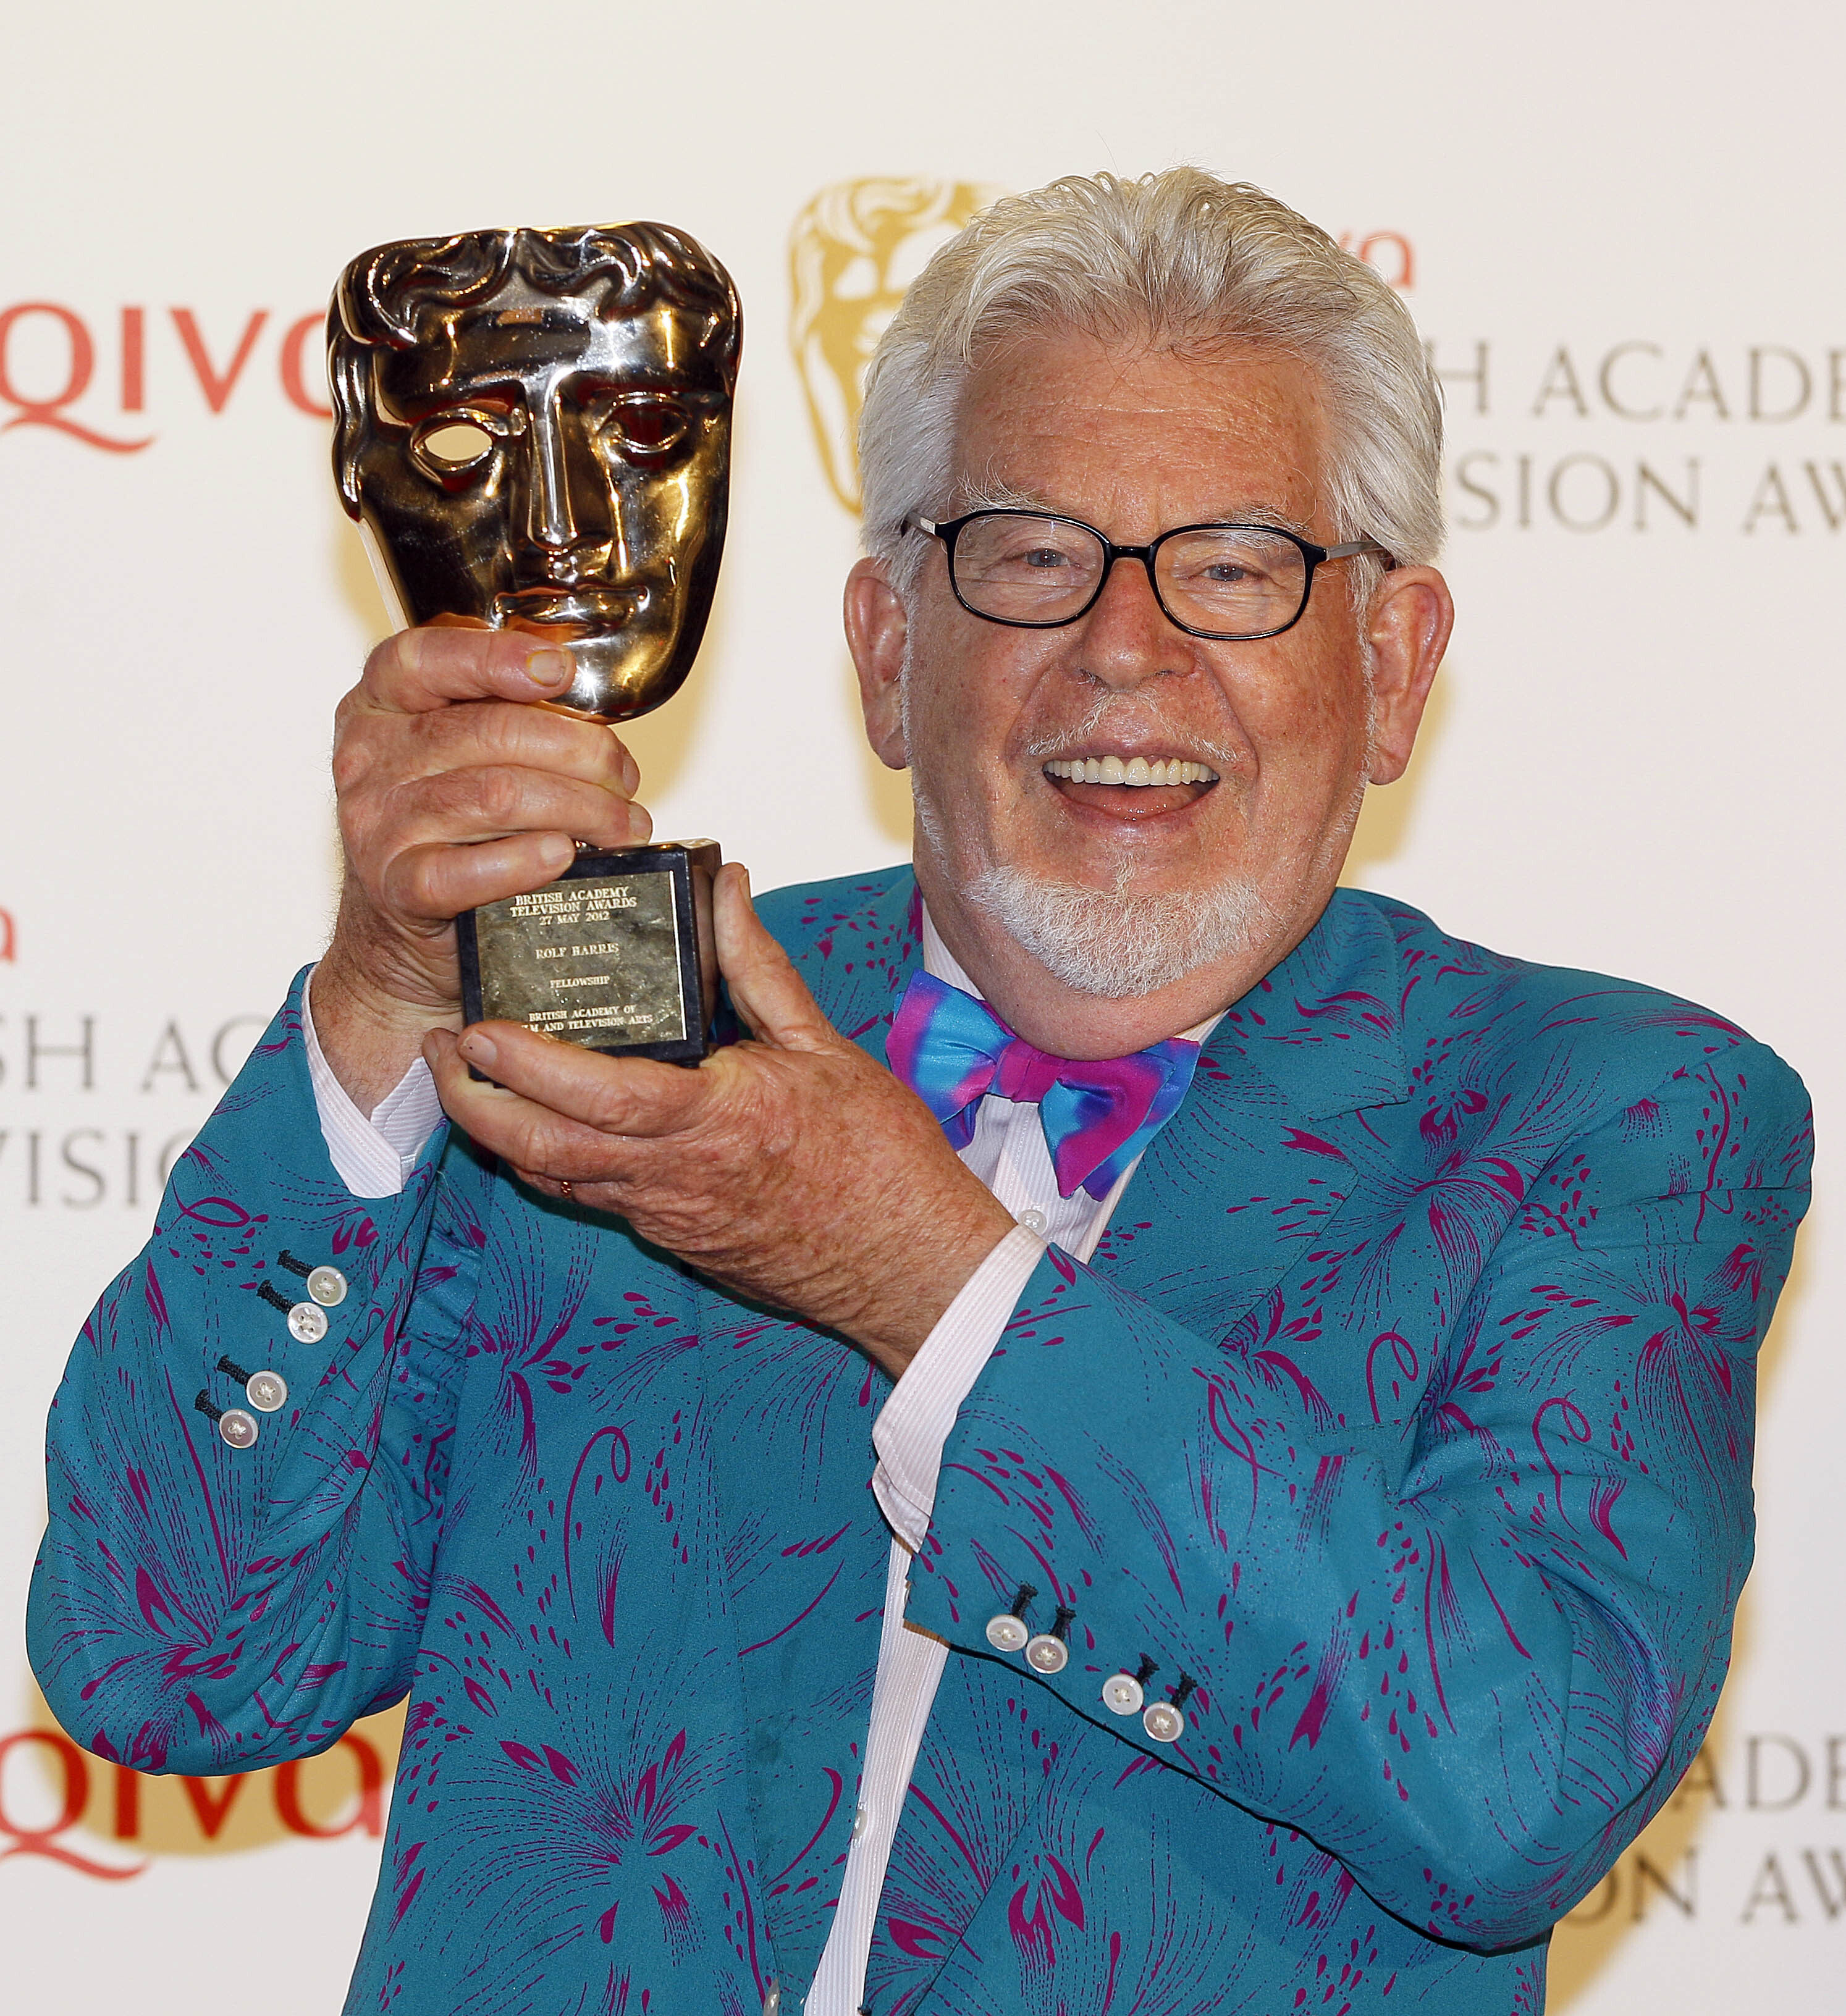 Australian entertainer Rolf Harris holds up a TV award in London in 2012. In 2014 he was convicted of abusing young girls decades before, and sent to prison. Photo: AP